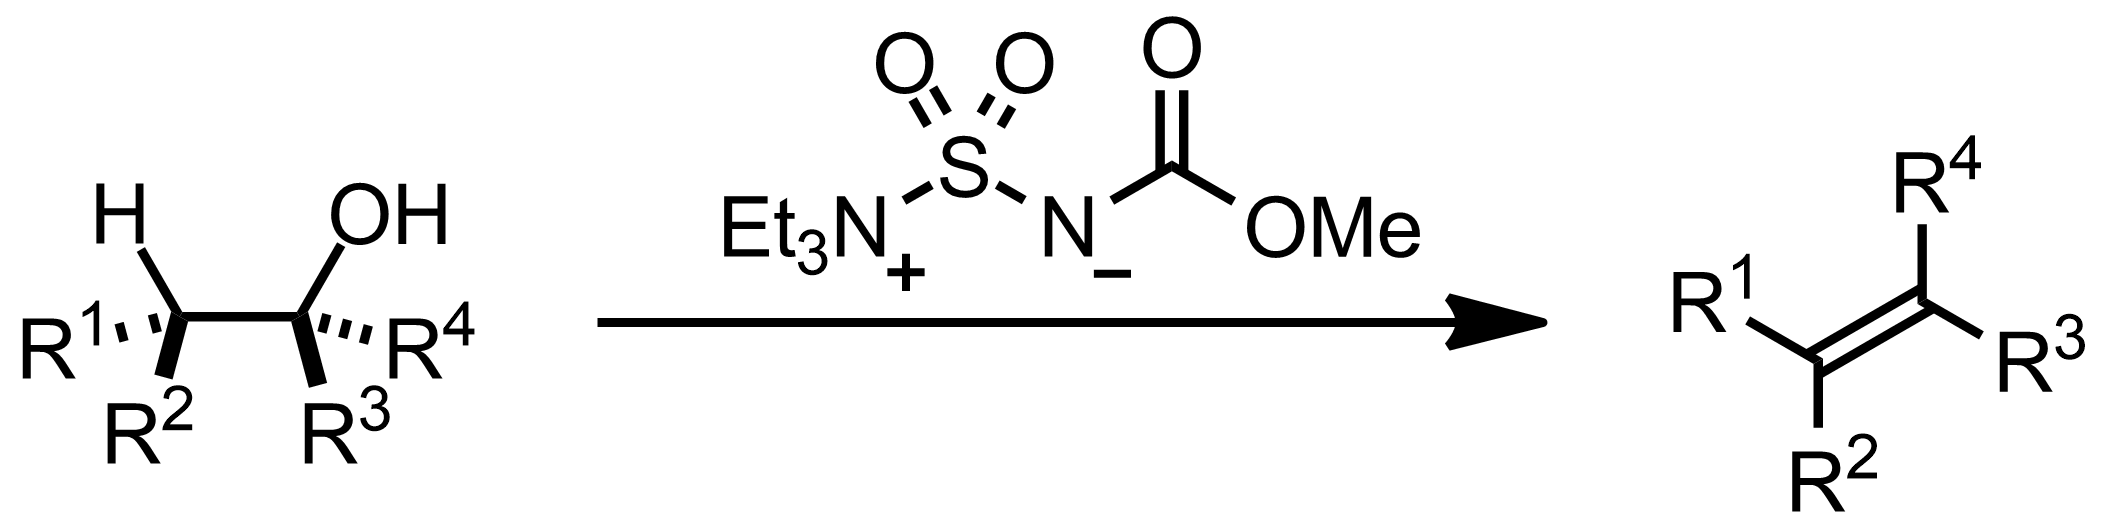 Schematic representation of the Burgess Dehydration.